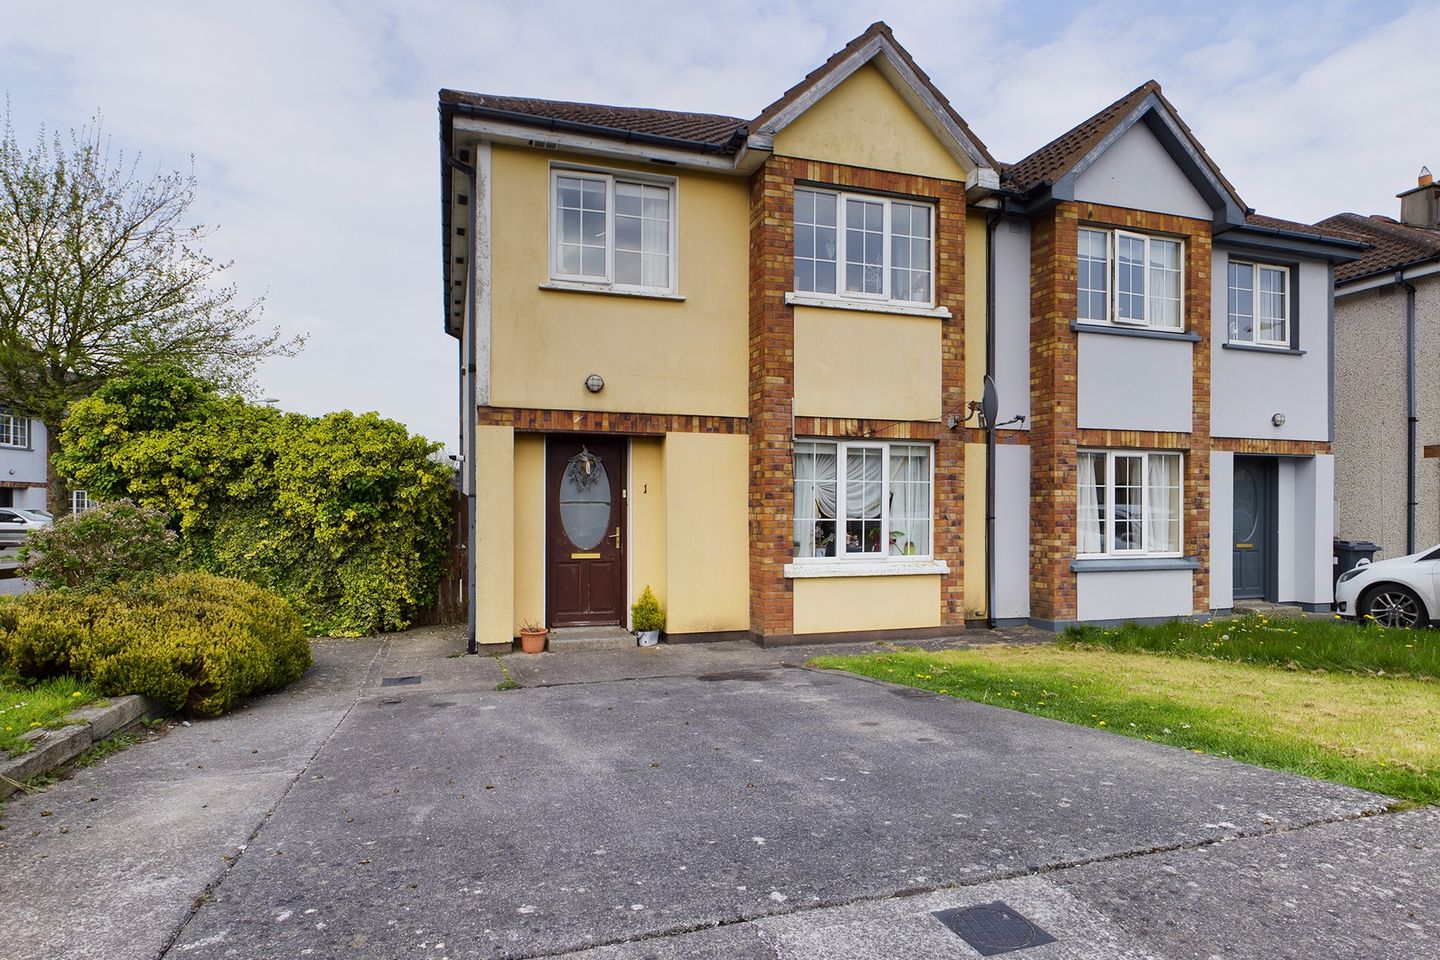 1 Briot Walk, Templars Hall, Waterford City, Co. Waterford